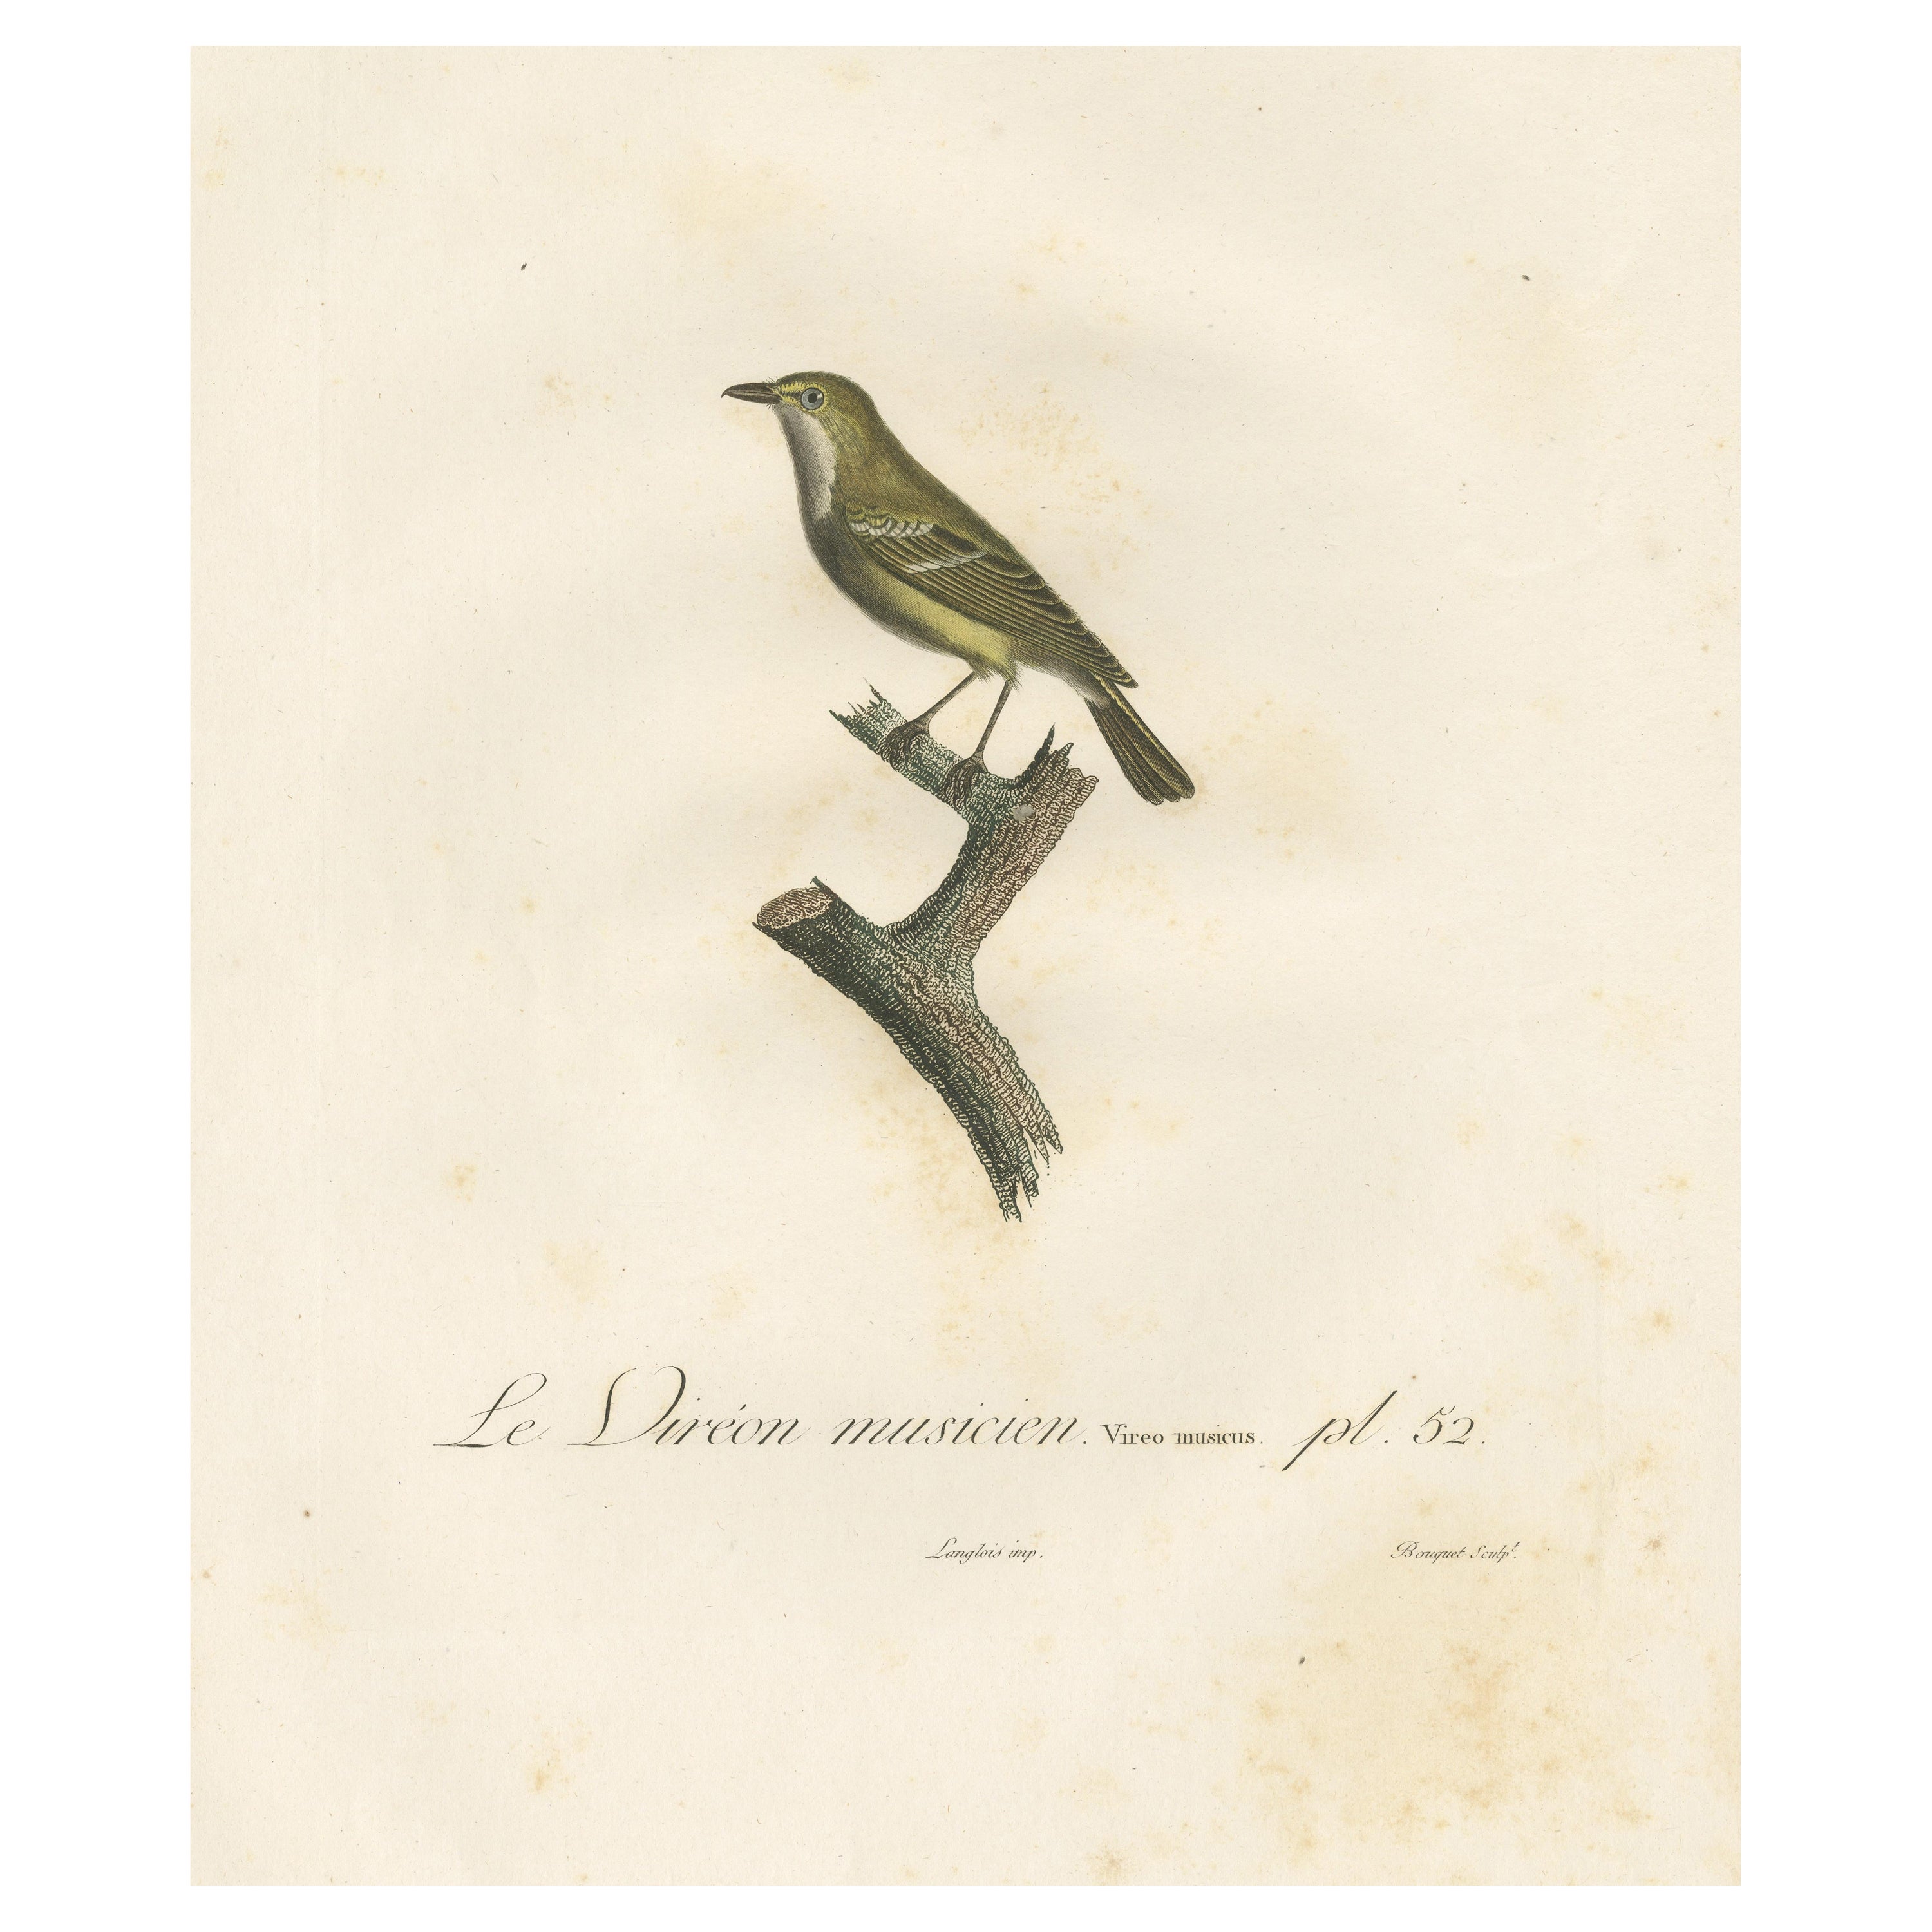 Large Antique Vireo Bird Illustration - 1807 Vieillot Handcolored Print For Sale